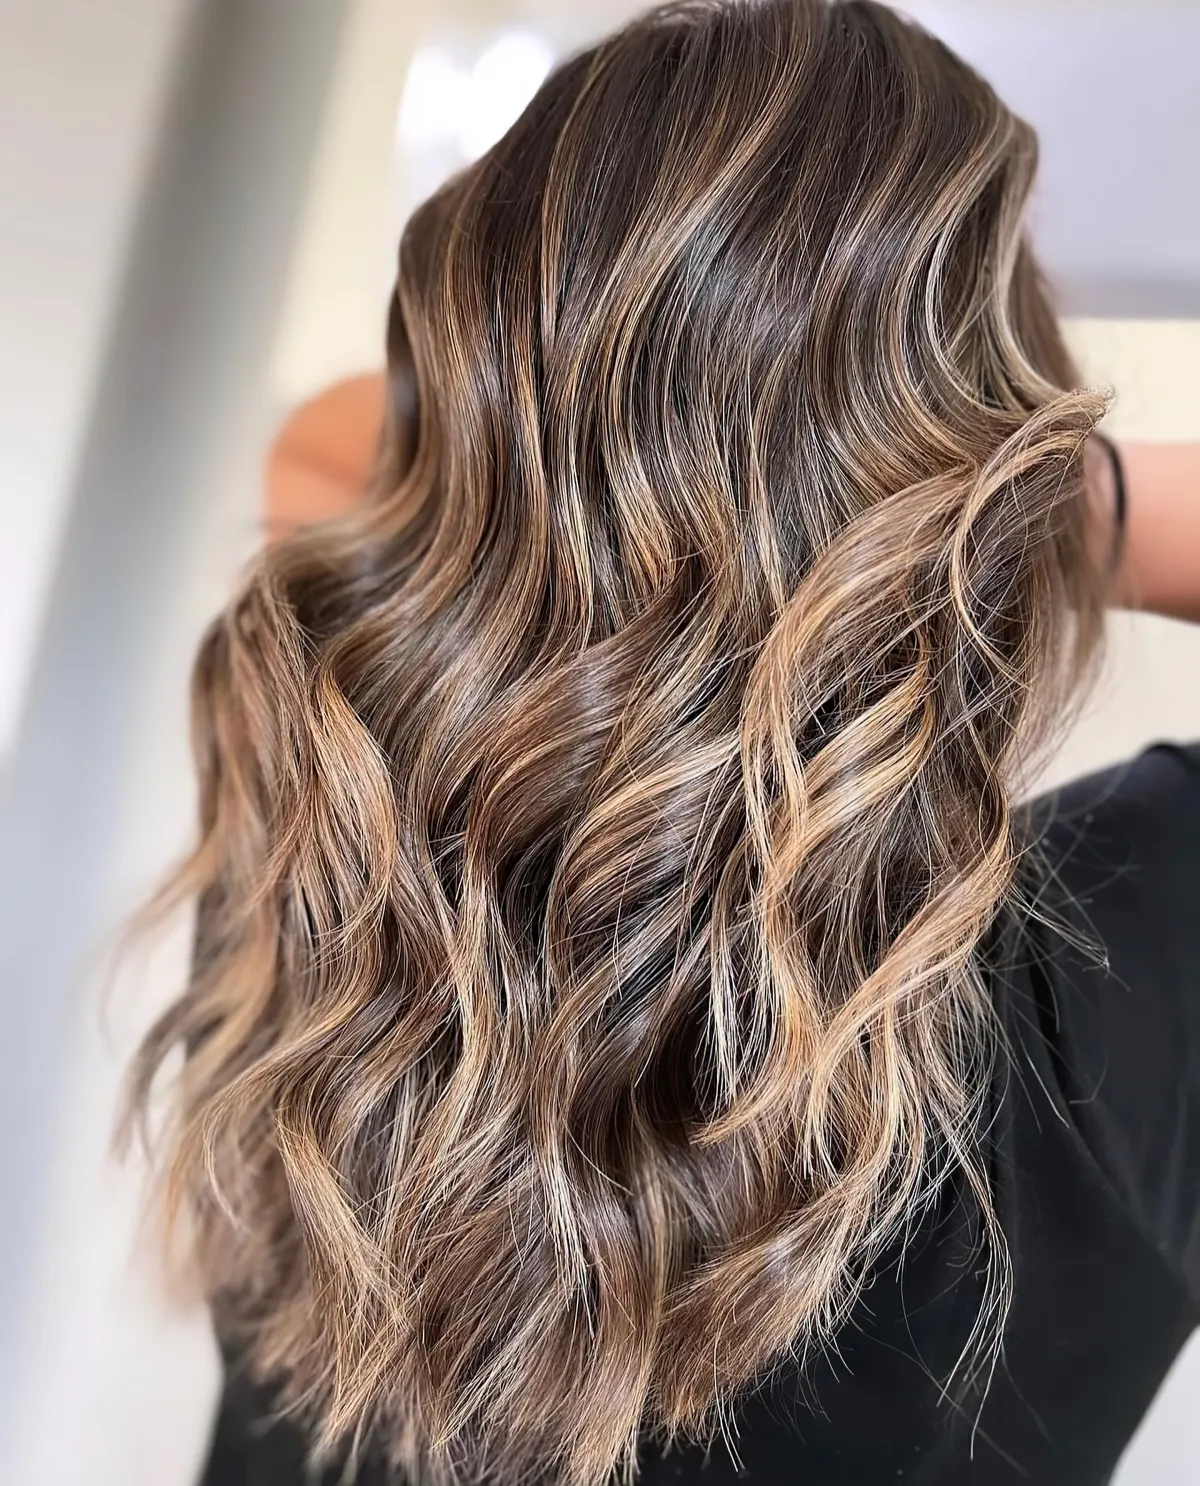 comment adopter balayage blond sur brune conseils